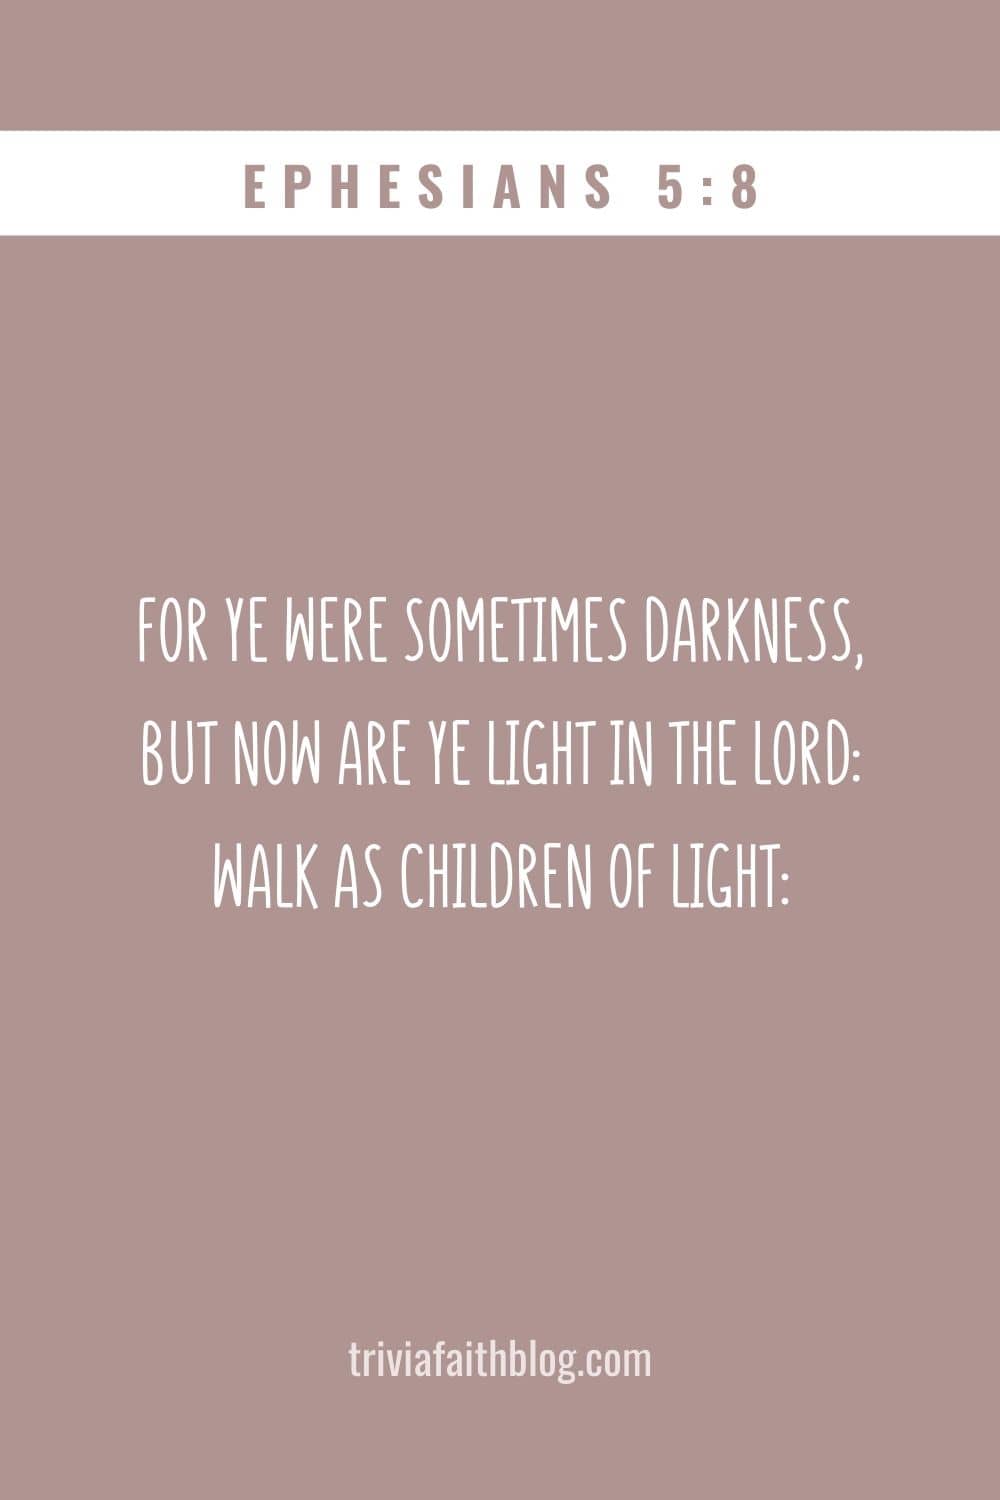 For ye were sometimes darkness, but now are ye light in the Lord